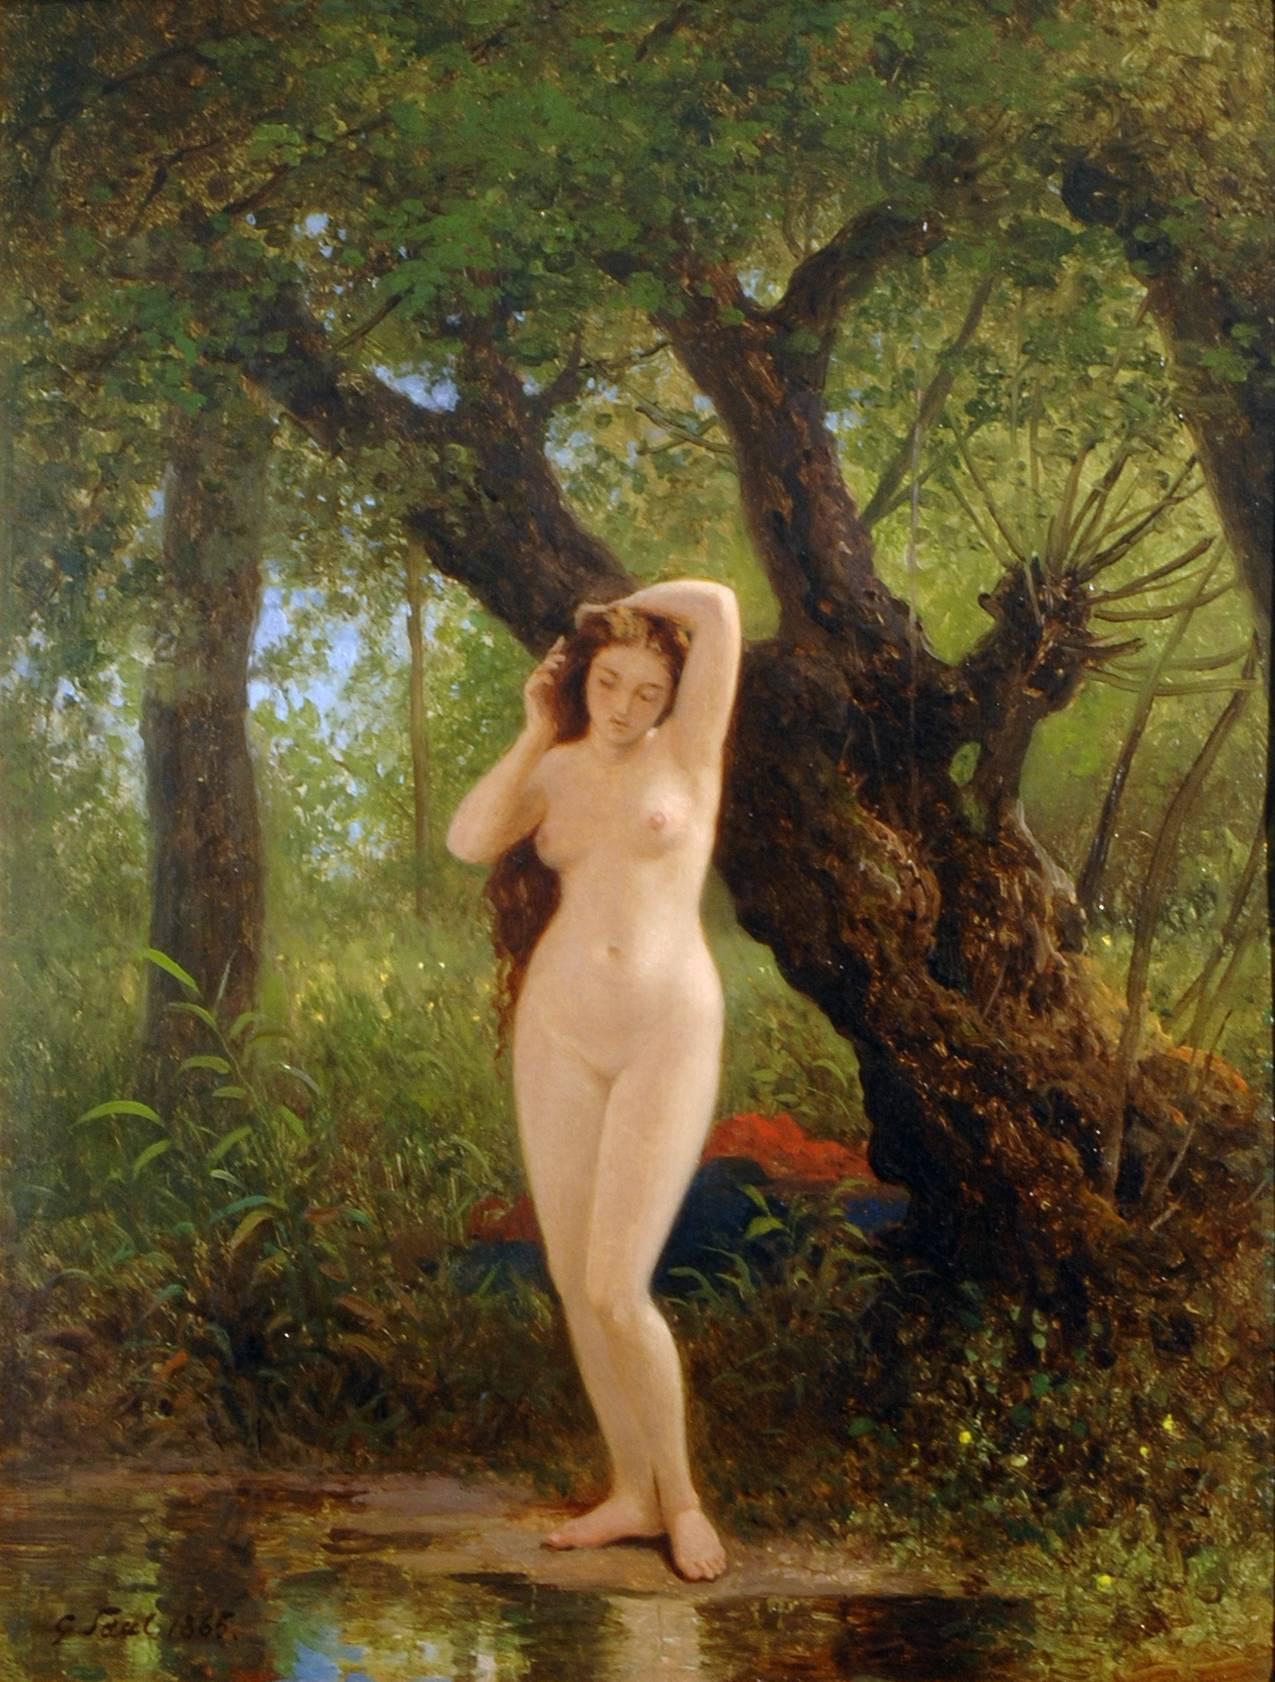 Green Landscape with Dreamlike Nude Figure at waters edge 'Before Bathing' 